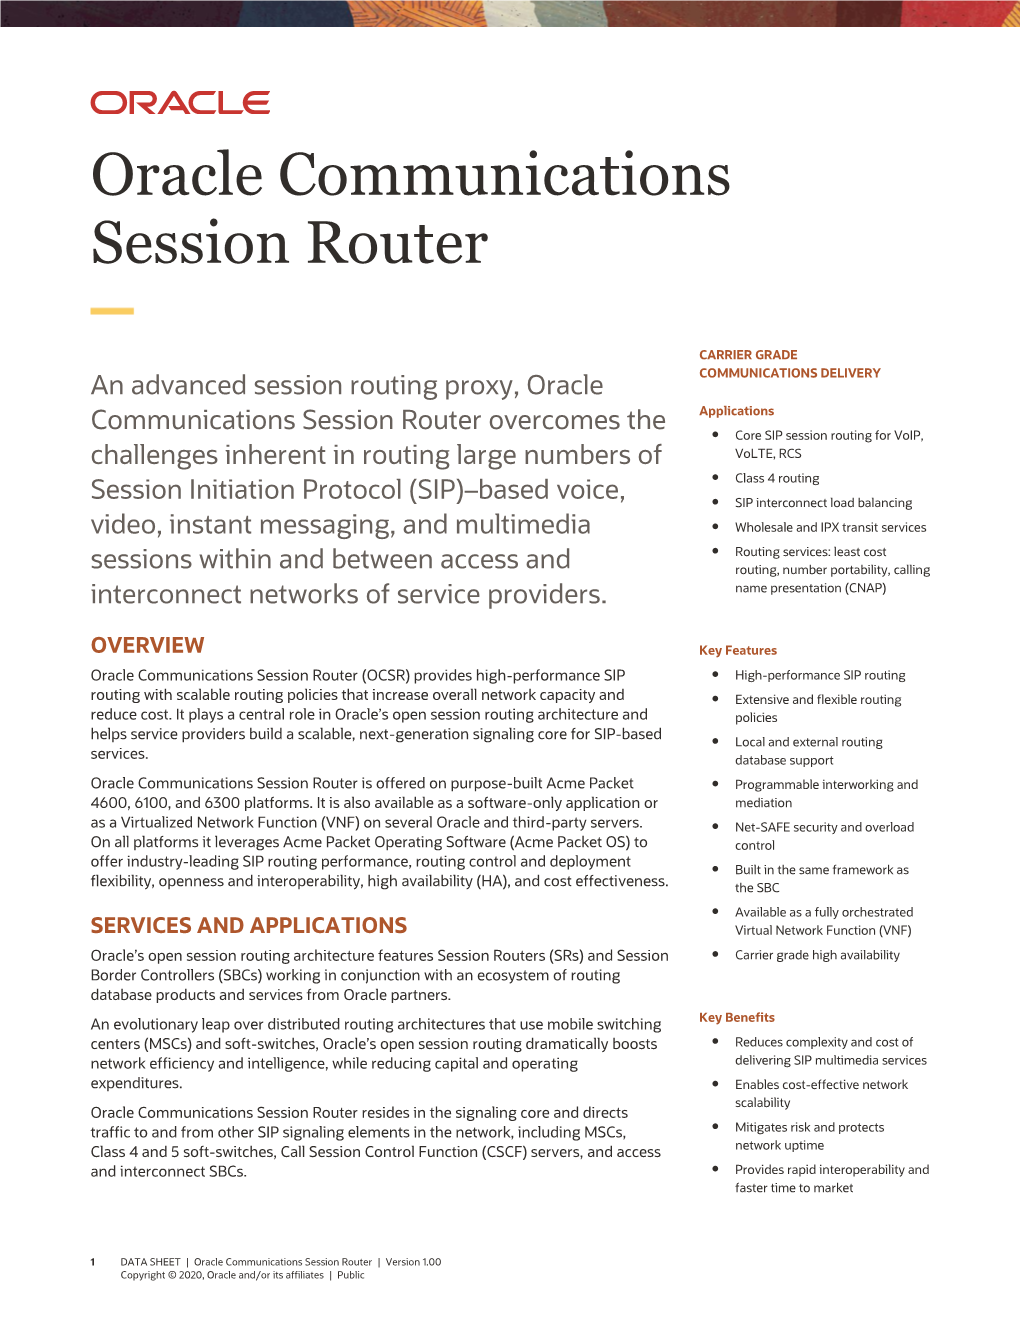 Oracle Communications Session Router